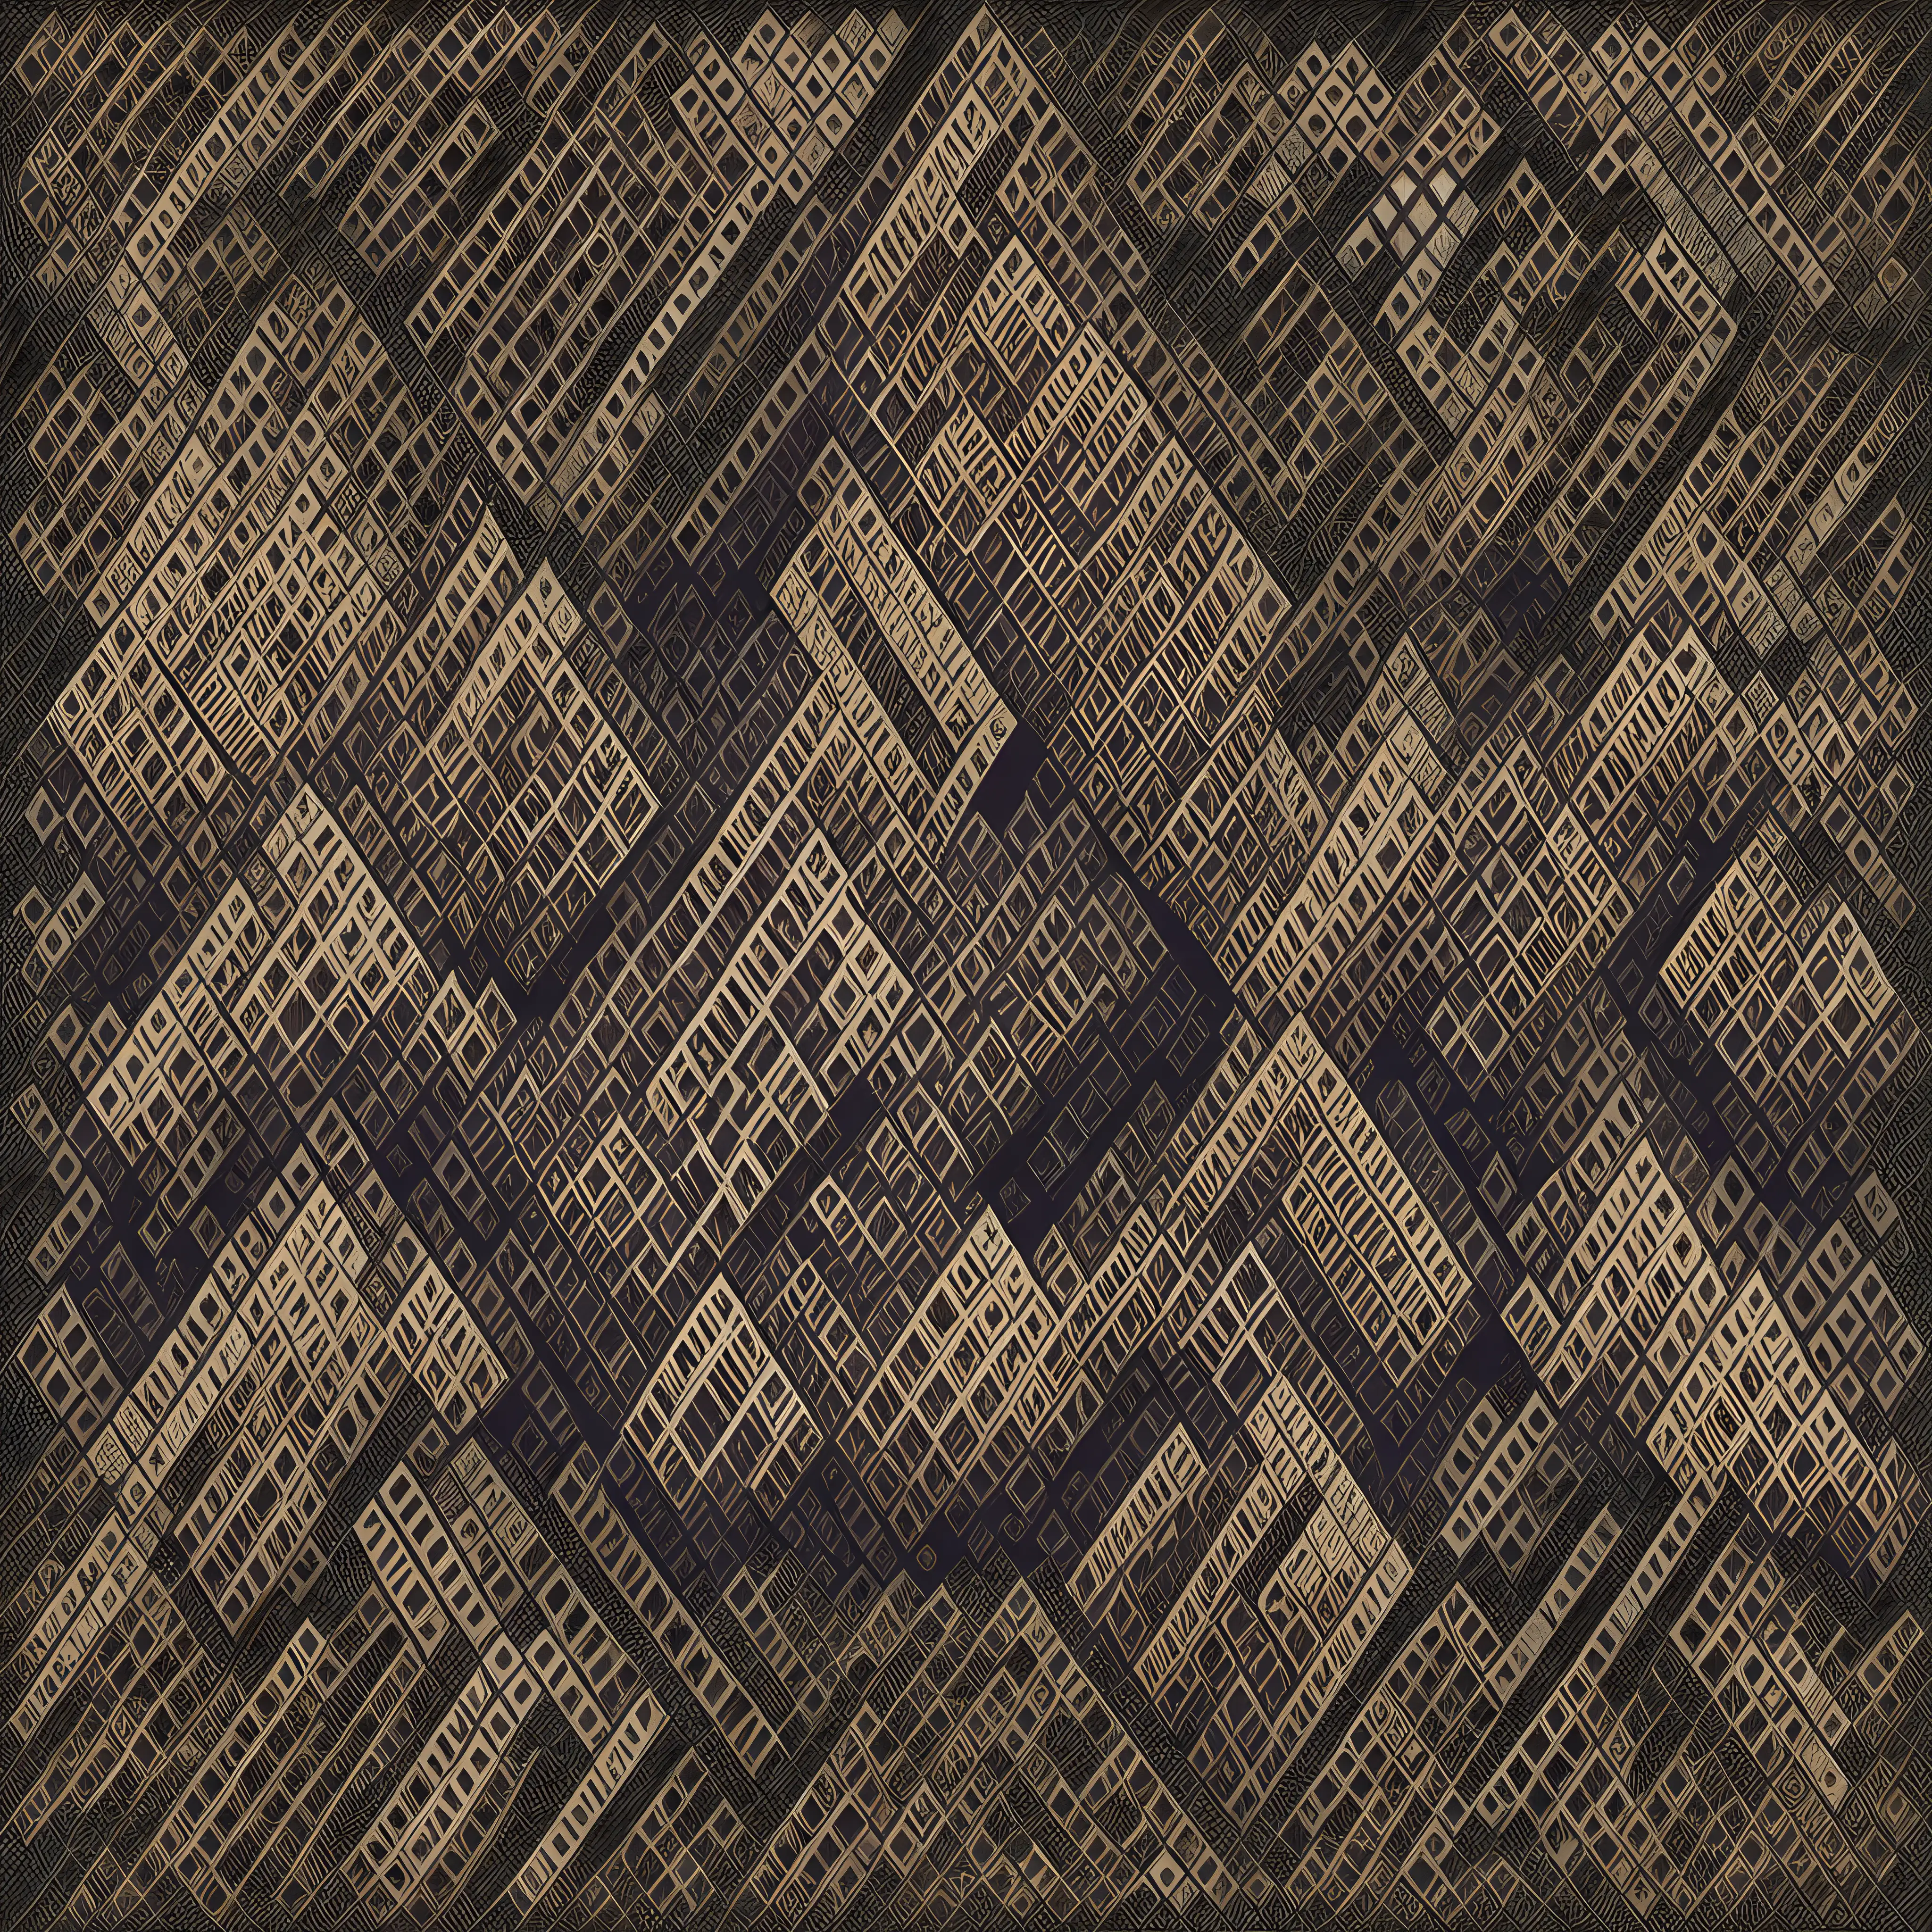 is an image inspired by cellular automata, featuring abstract patterns that resemble the output of such algorithms. The elements are arranged in a grid-like structure, with a range of muted colors representing the different states of the cells. This composition captures the dynamic and patterned nature of cellular automata, maintaining a purely abstract and non-representational form.